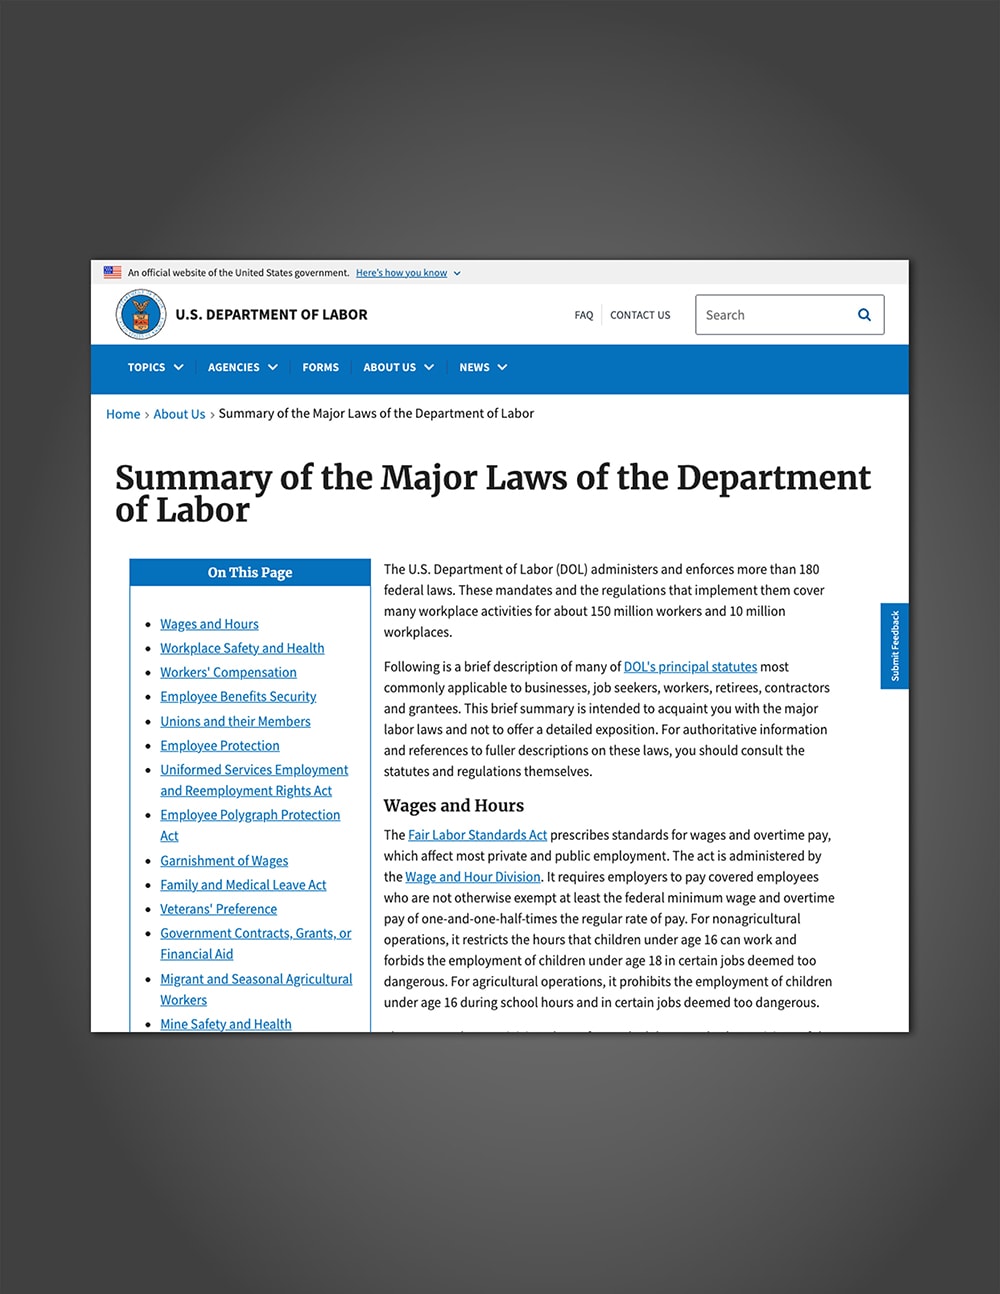 Major Laws of the Department of Labor